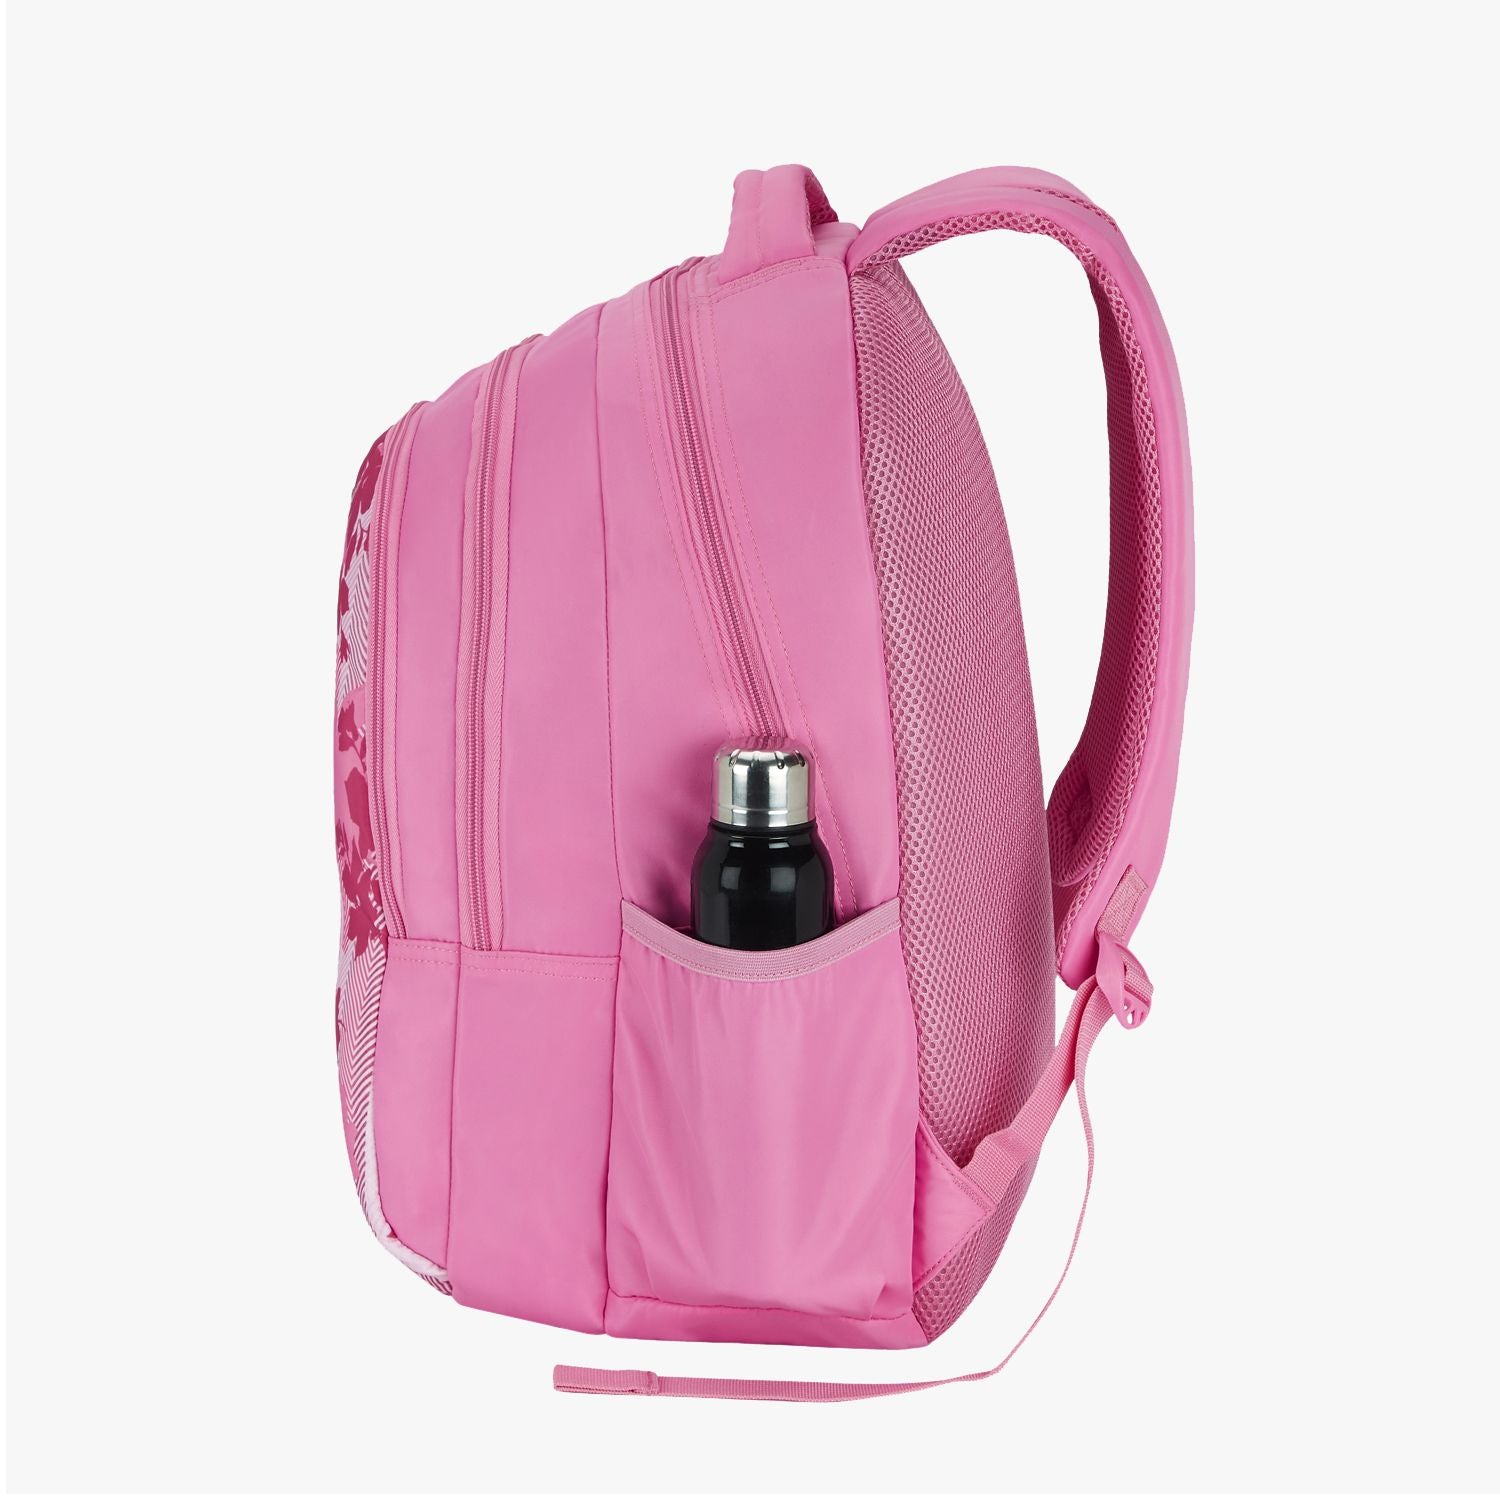 All Over Print Backpack With Bag Charm School Bag For Graduate